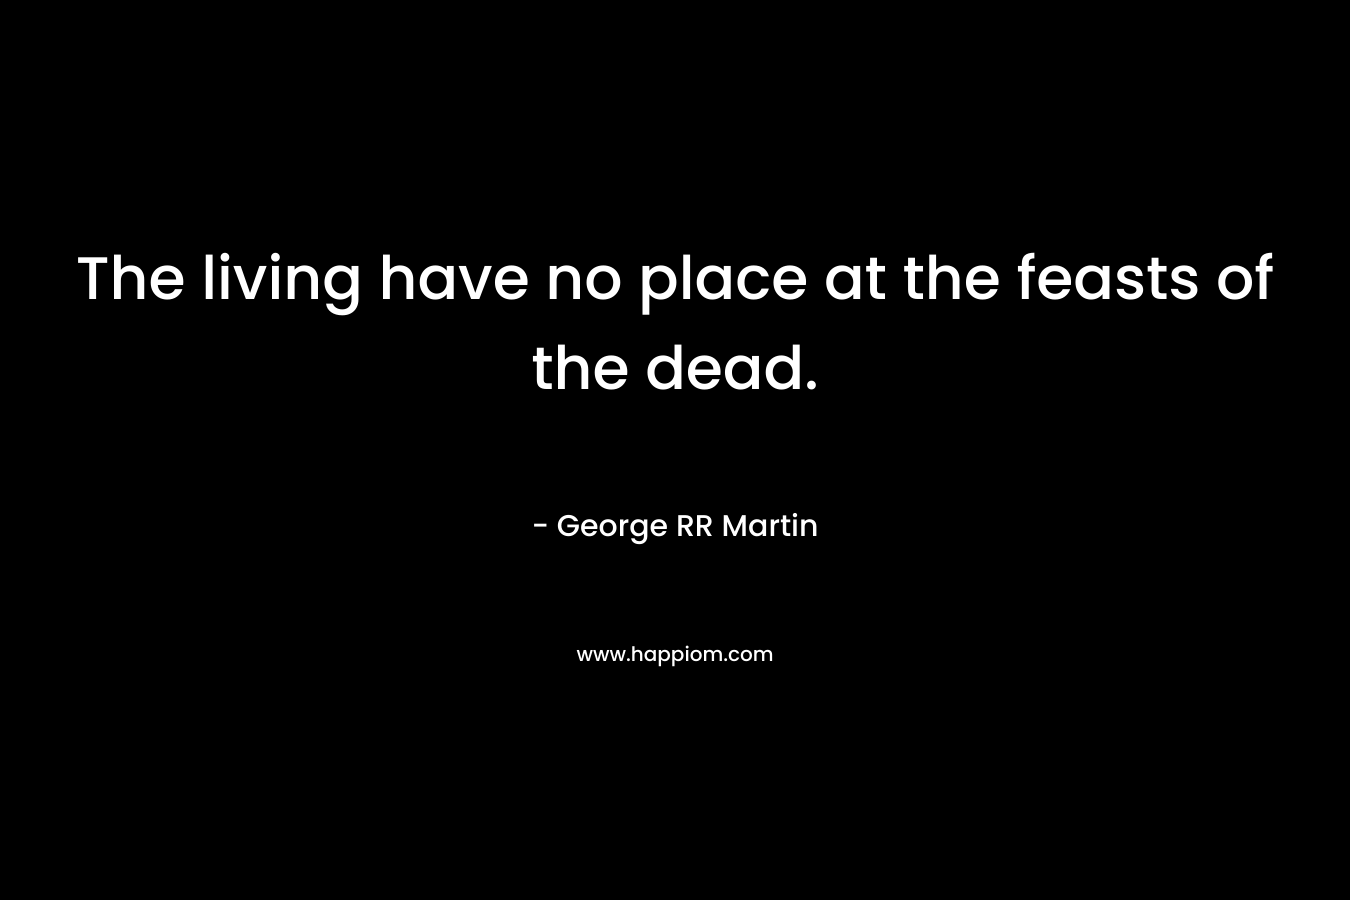 The living have no place at the feasts of the dead. – George RR Martin